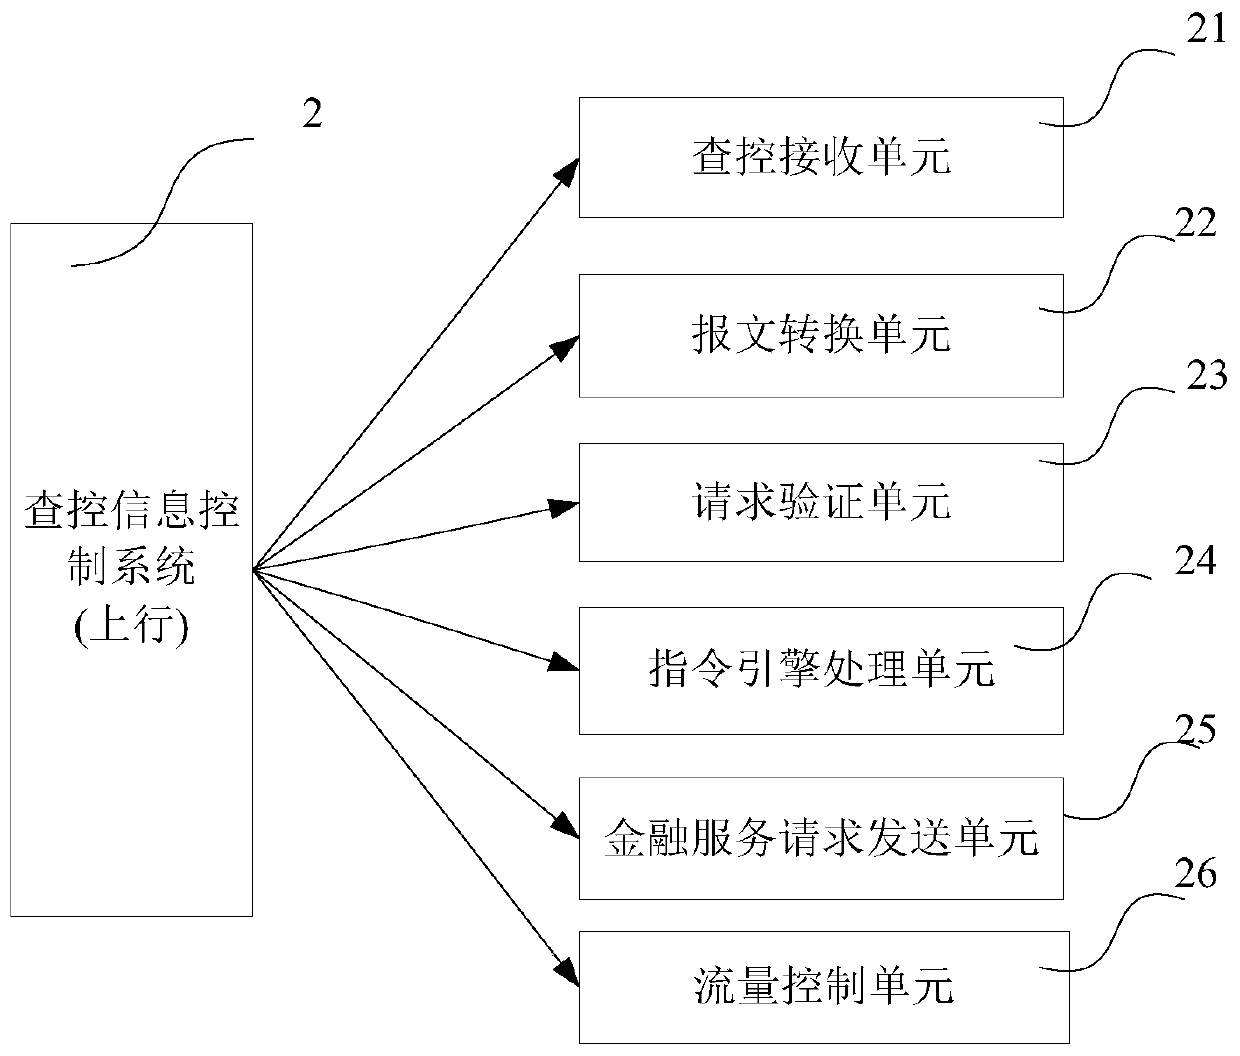 Hierarchical control data checking and control processing system and method